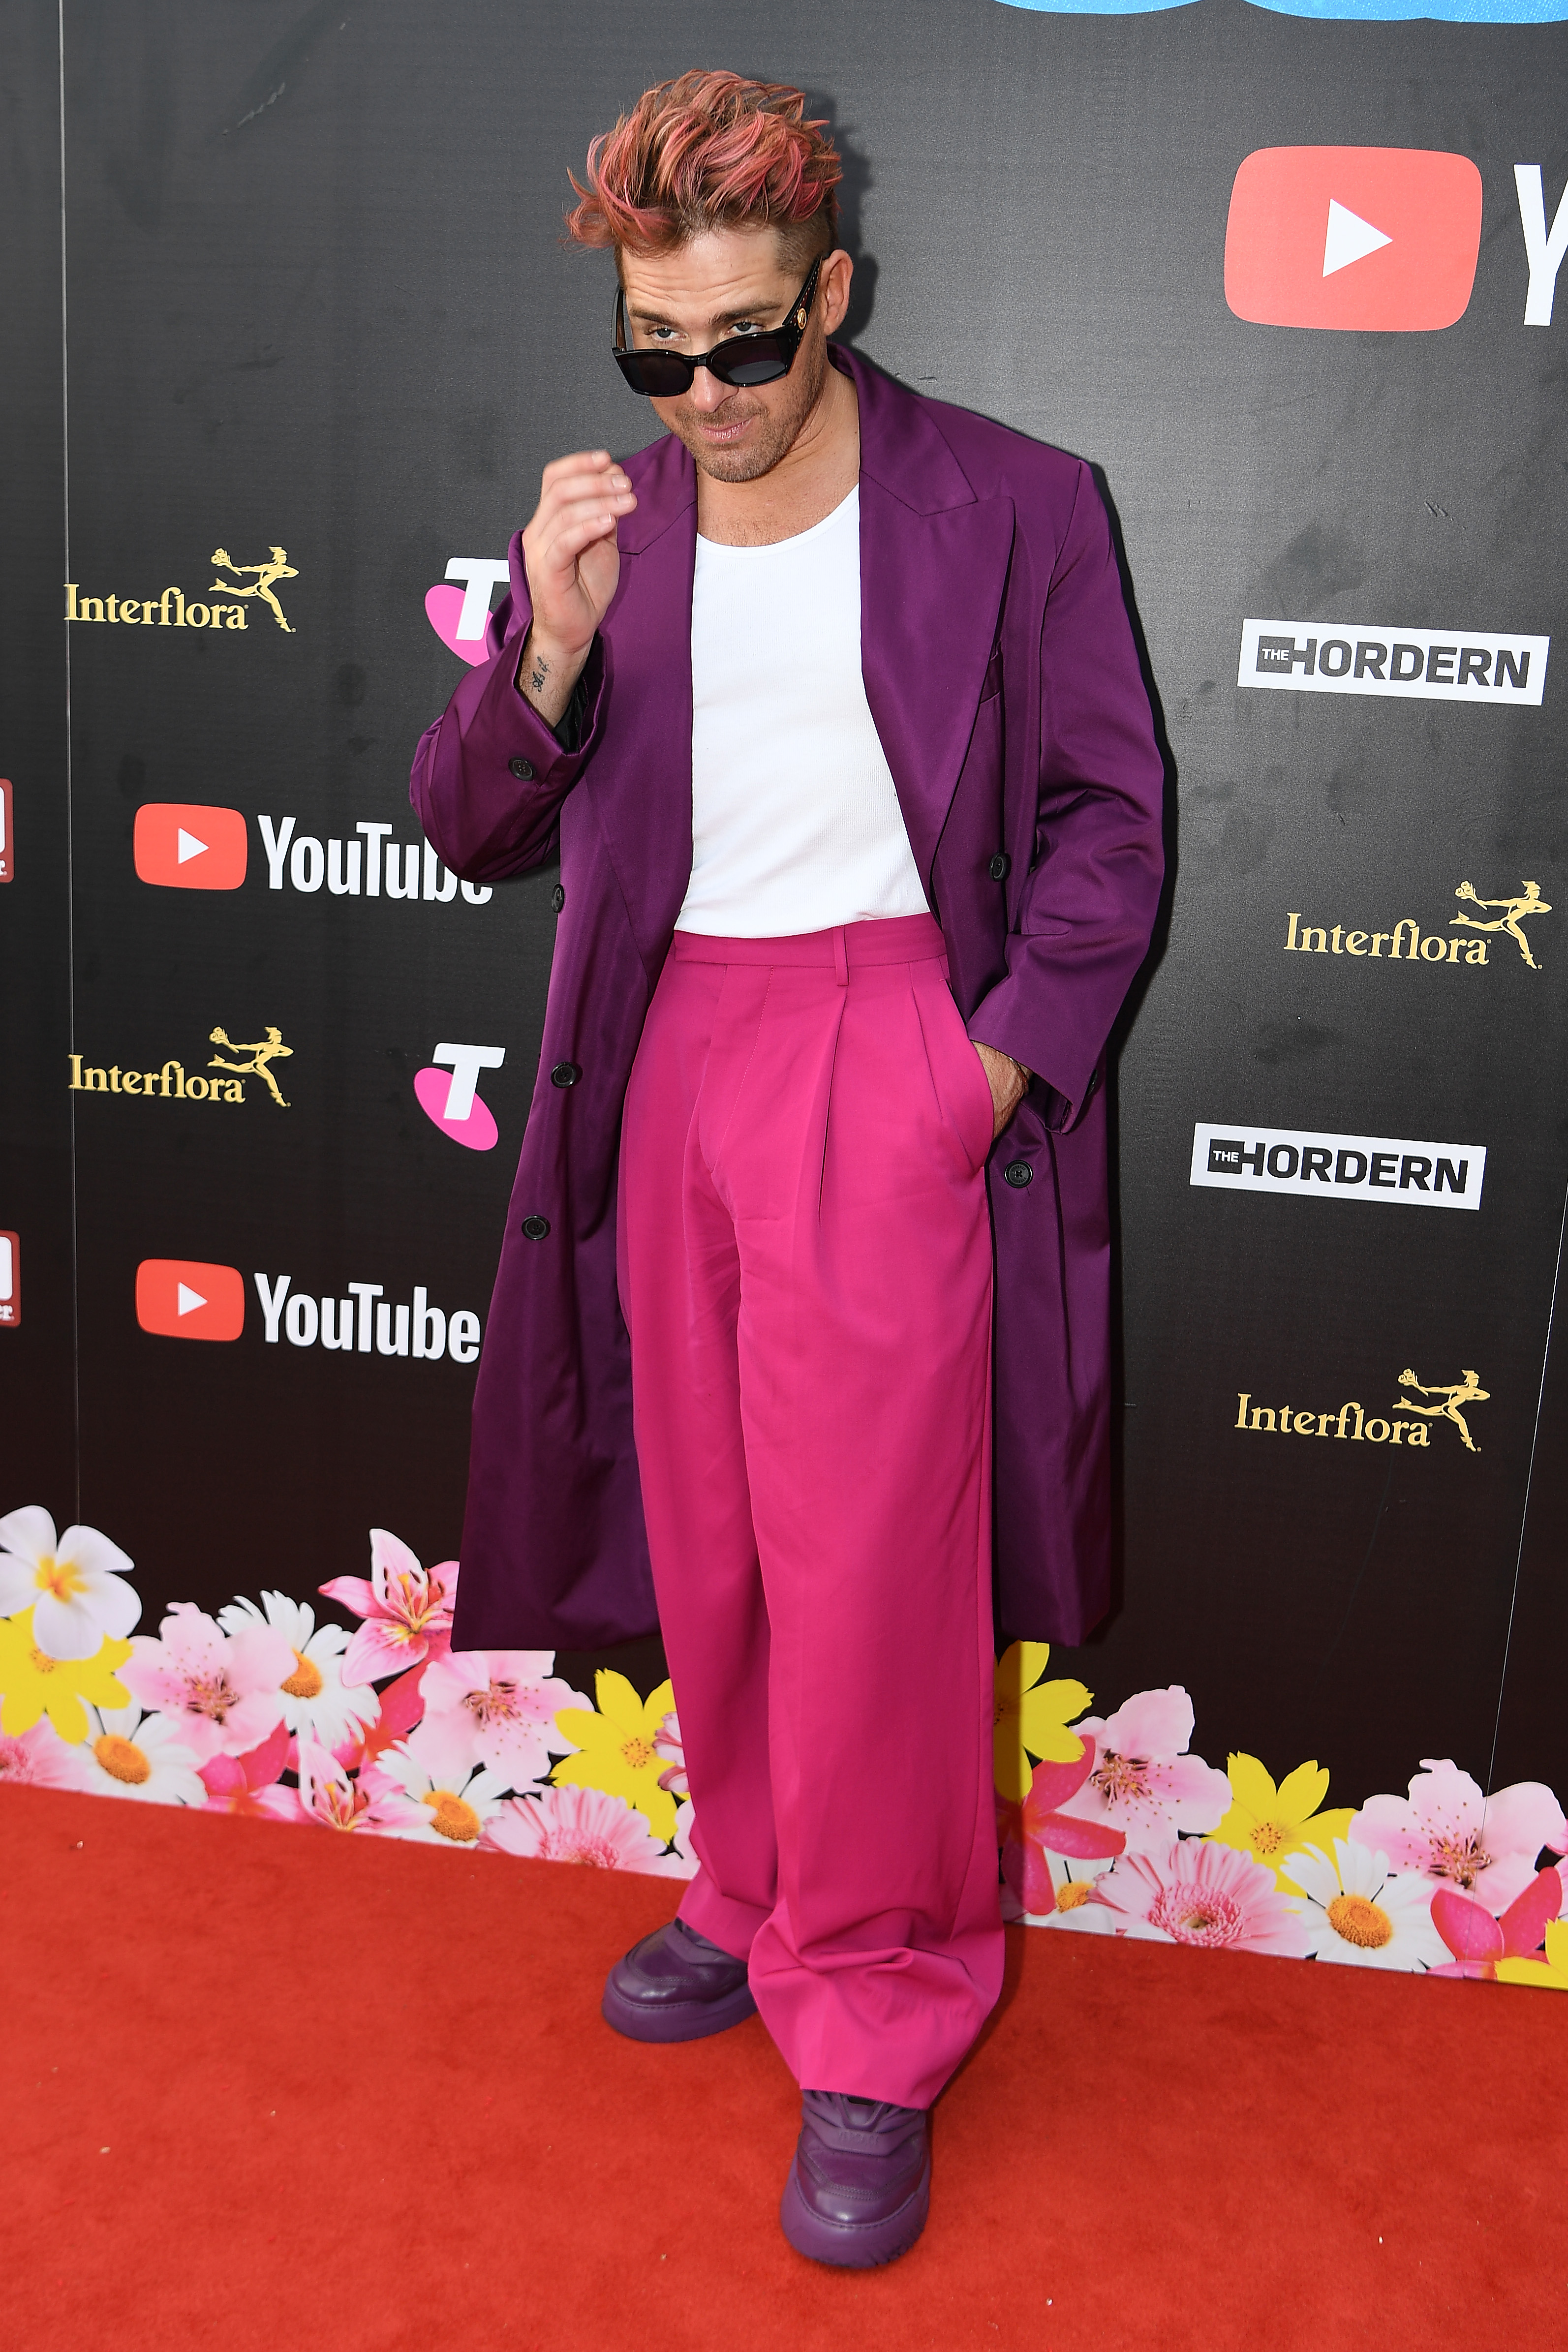 Hugh Sheridan wearing a purple suit jacket, a white top and bright pink pants